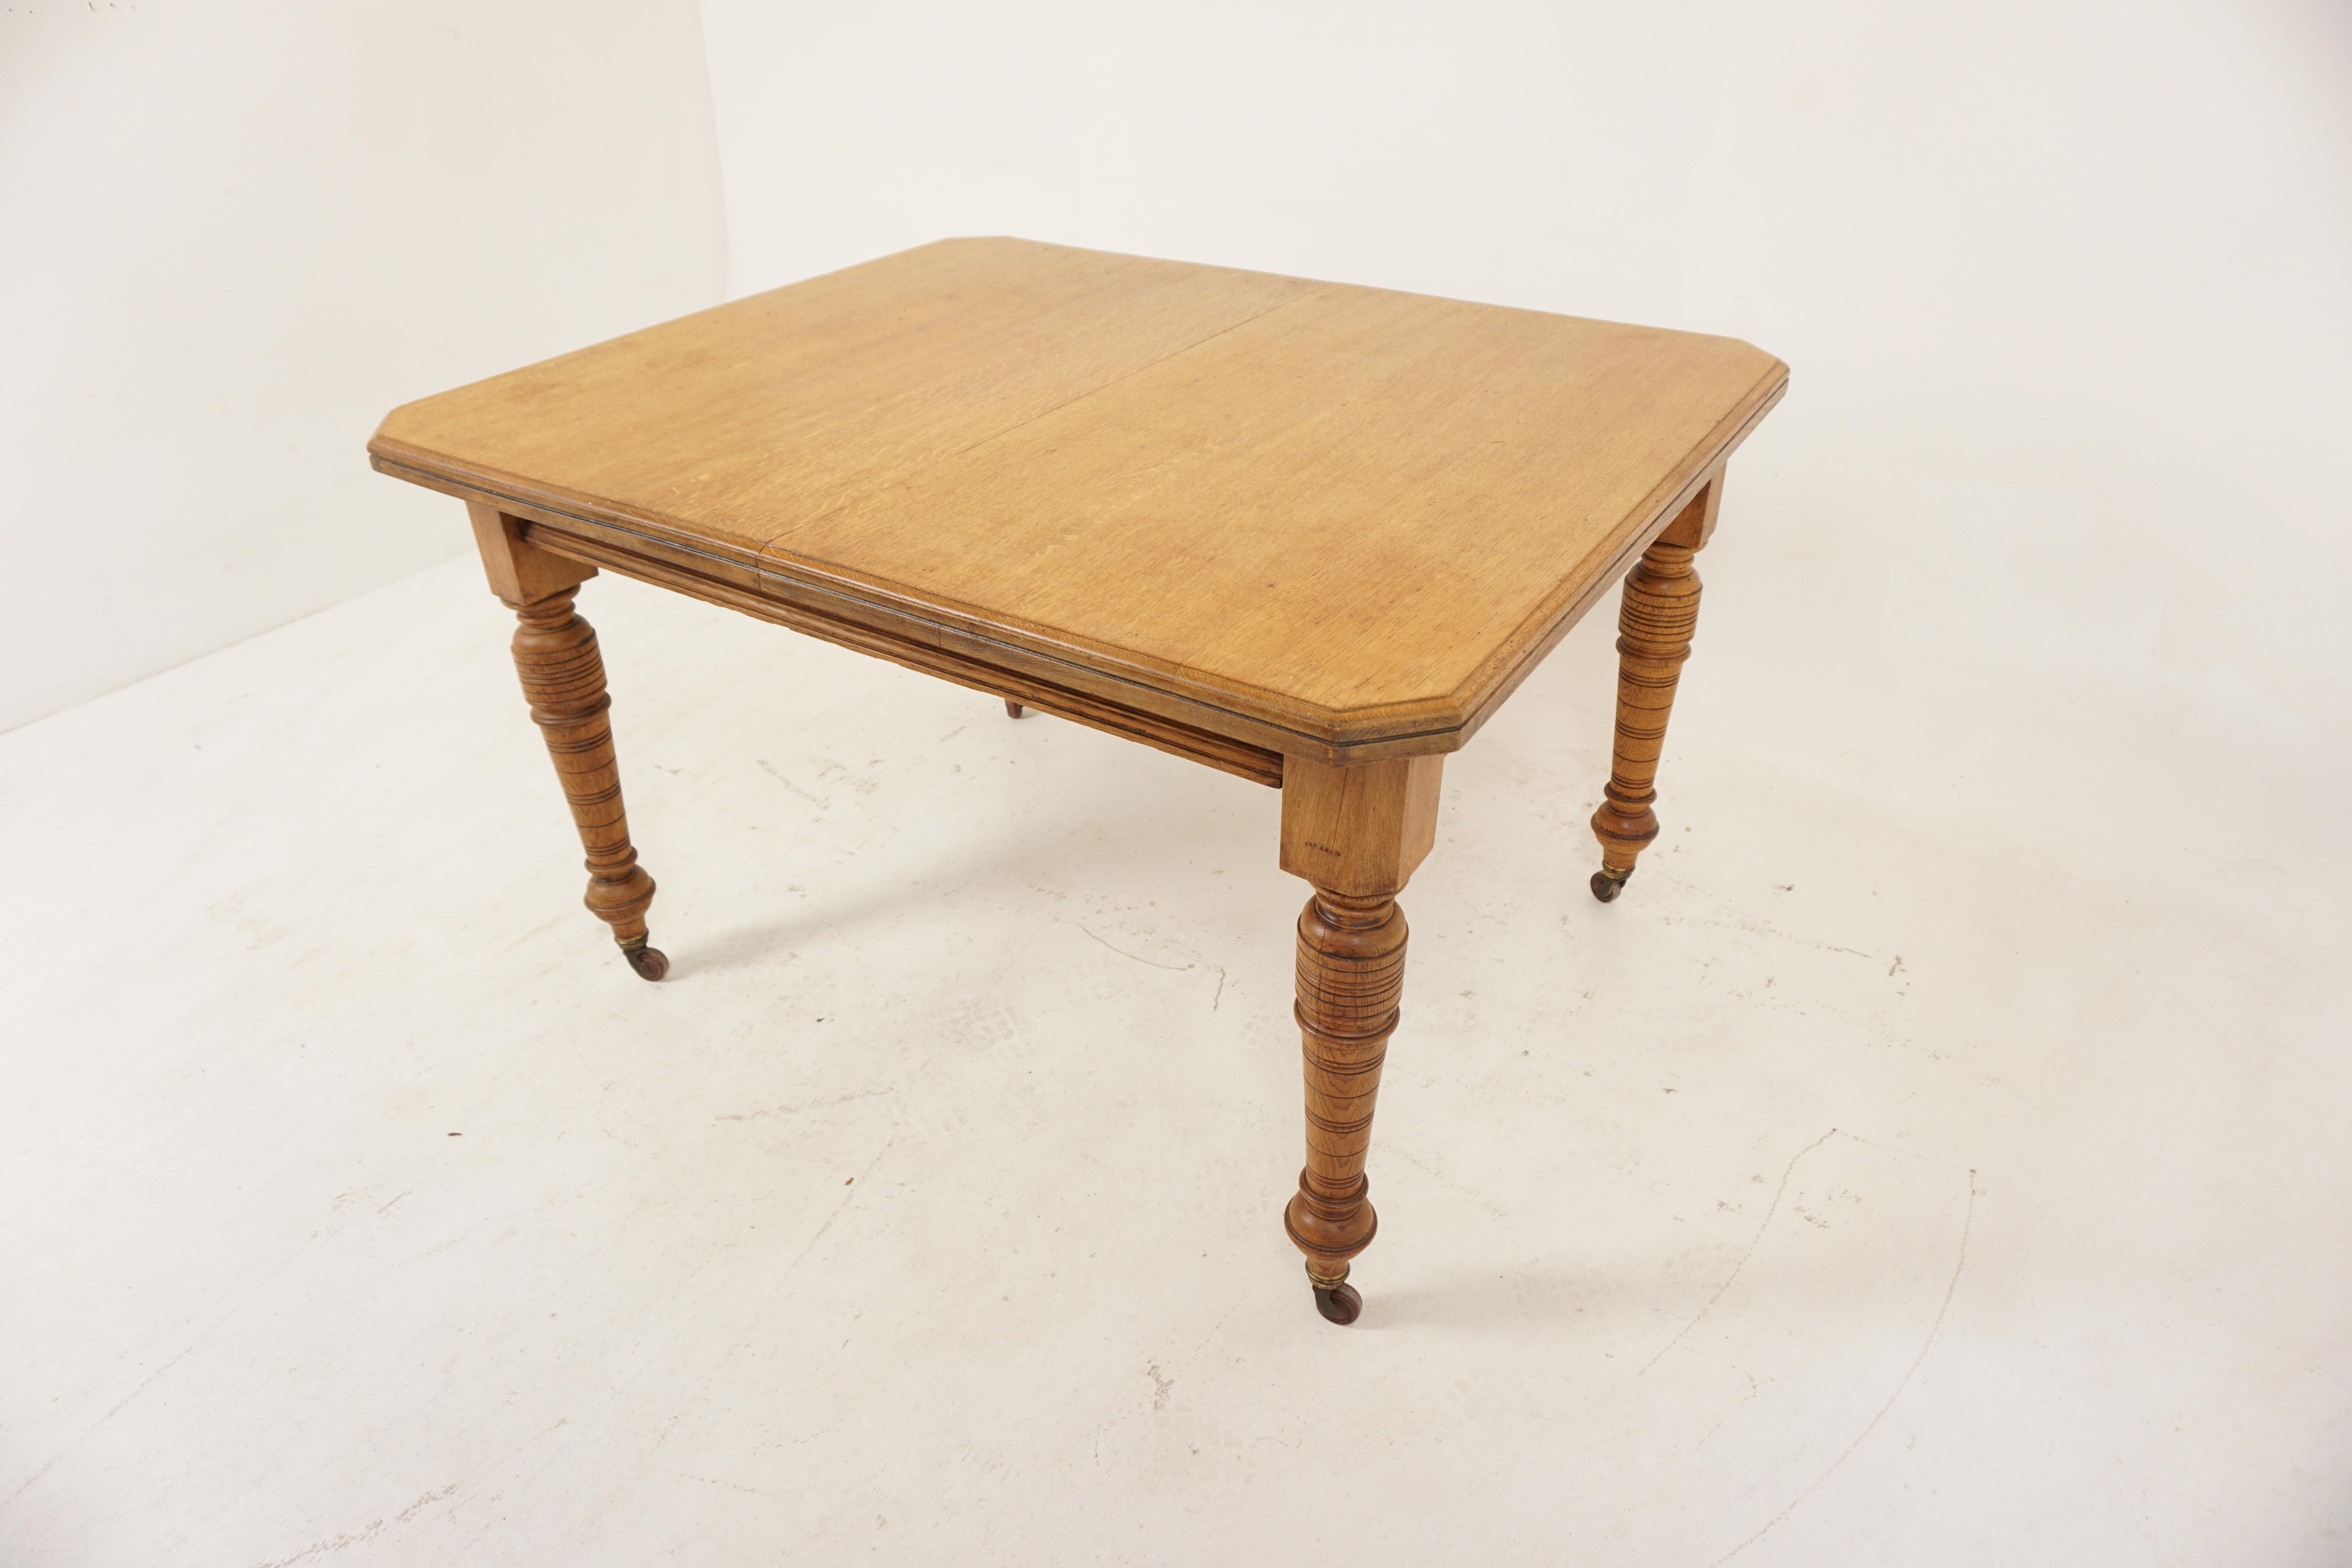 Antique Victorian Oak Dining Table With 2 Leaves, Scotland 1880, B2587

Scotland 1880
Solid Oak
Original finish
Rectangular moulded top with canted ends
The table extends to accept 2 leaves 
All standing on 4 turned legs which end with